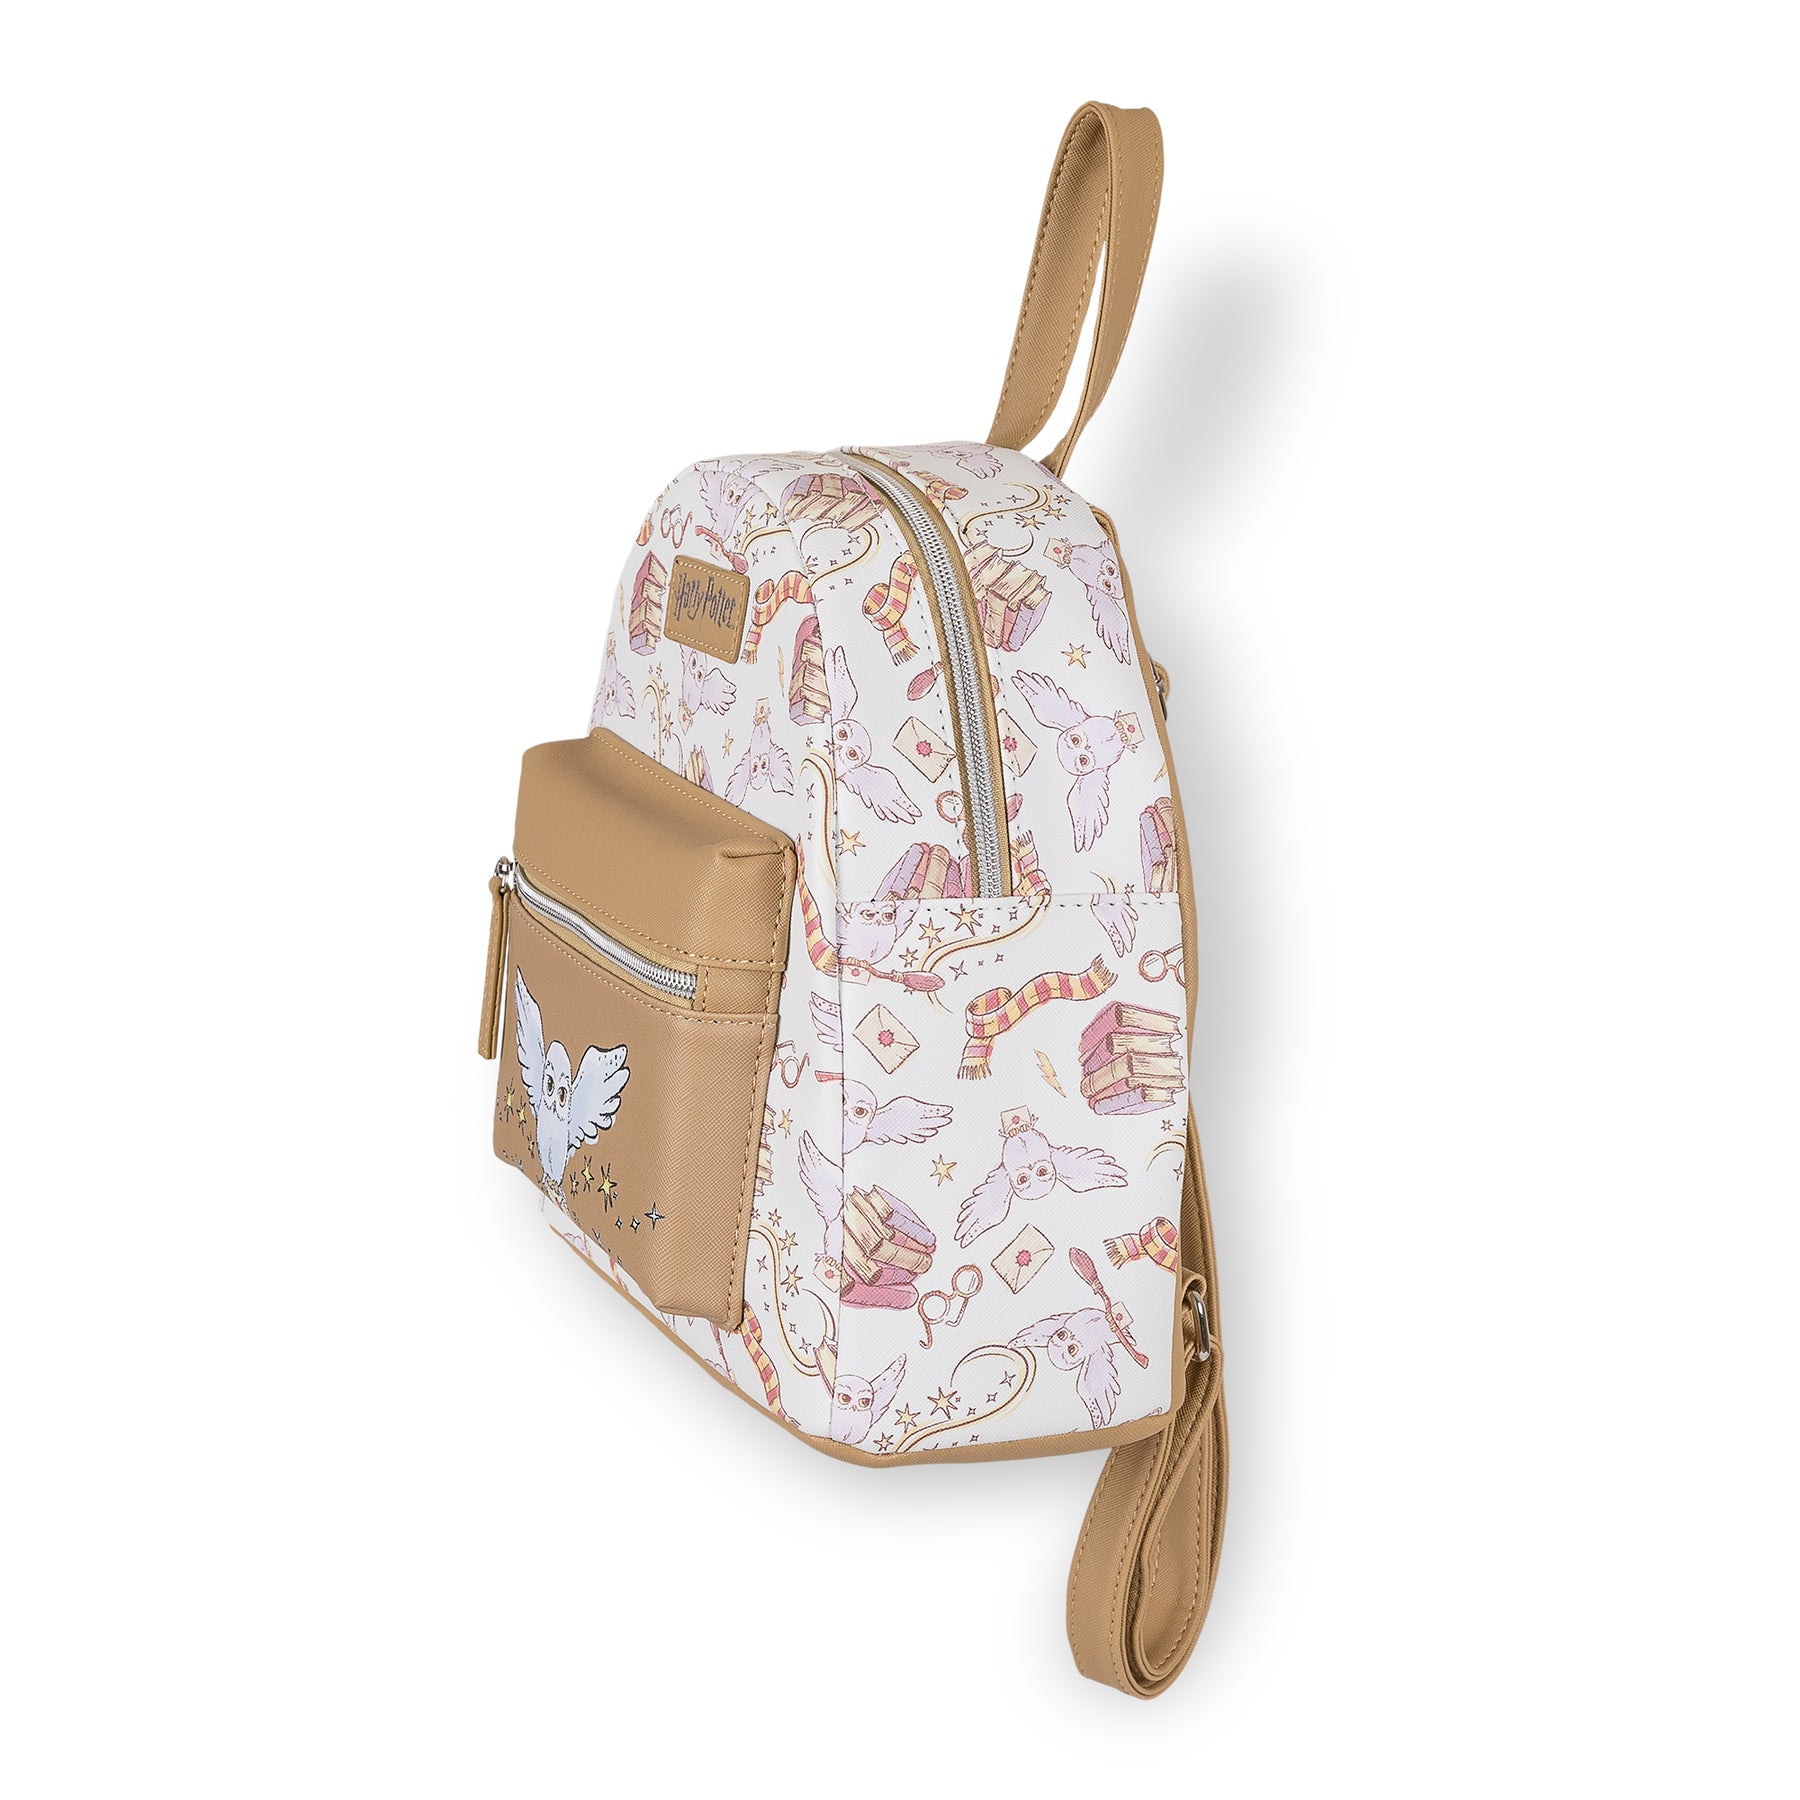 Eevee Sweet Choices Mini Backpack by Loungefly